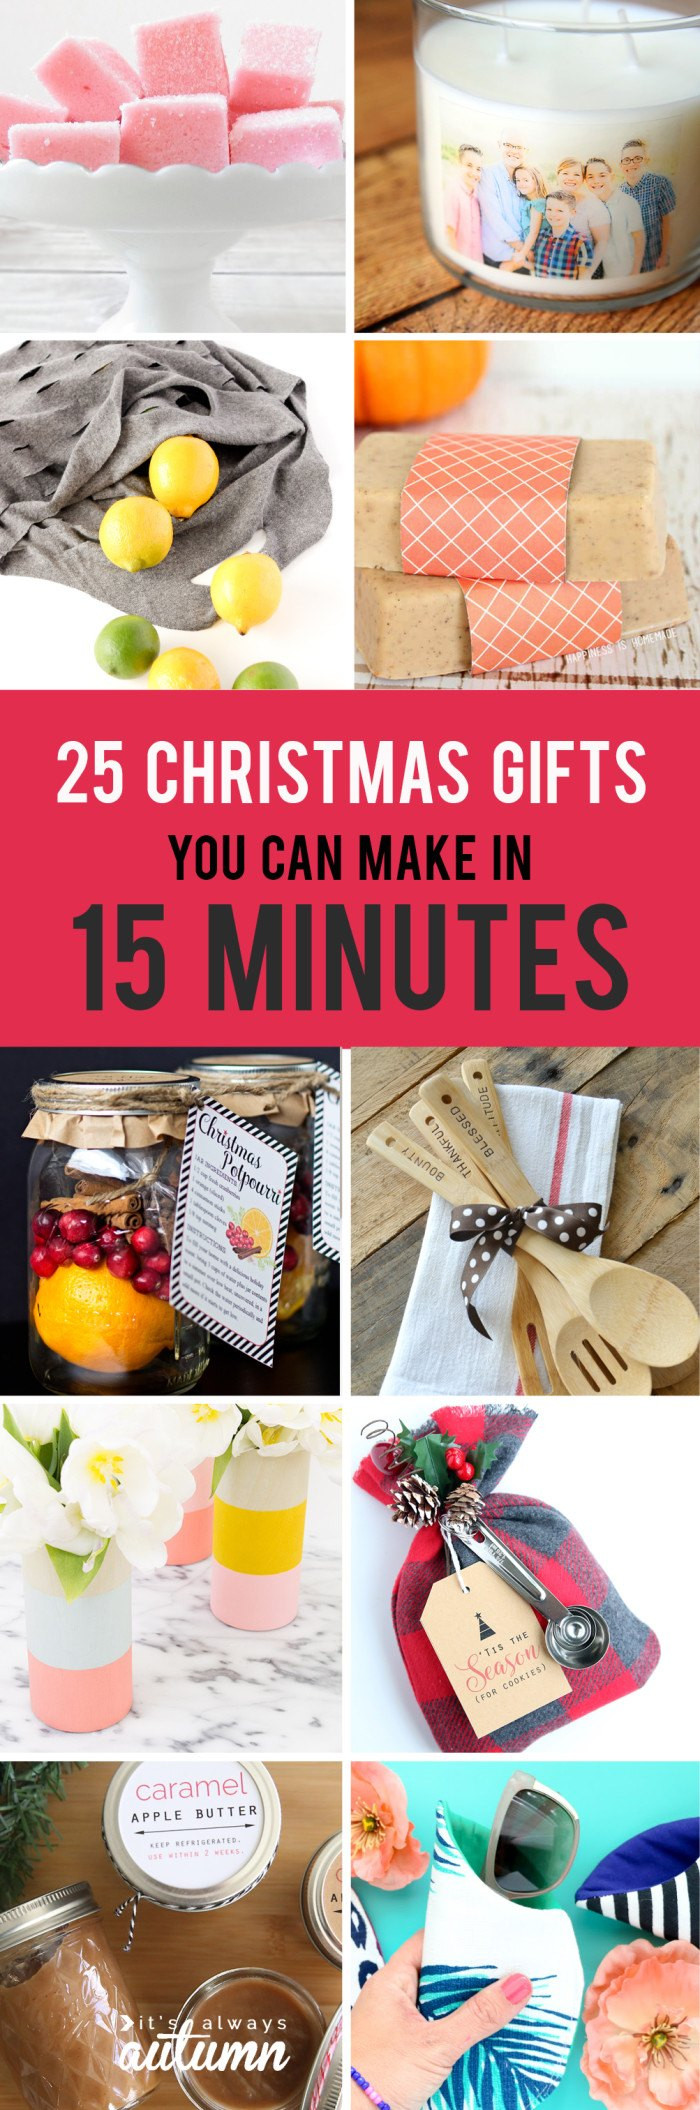 Cool DIY Christmas Gifts
 25 Easy Christmas Gifts That You Can Make in 15 Minutes